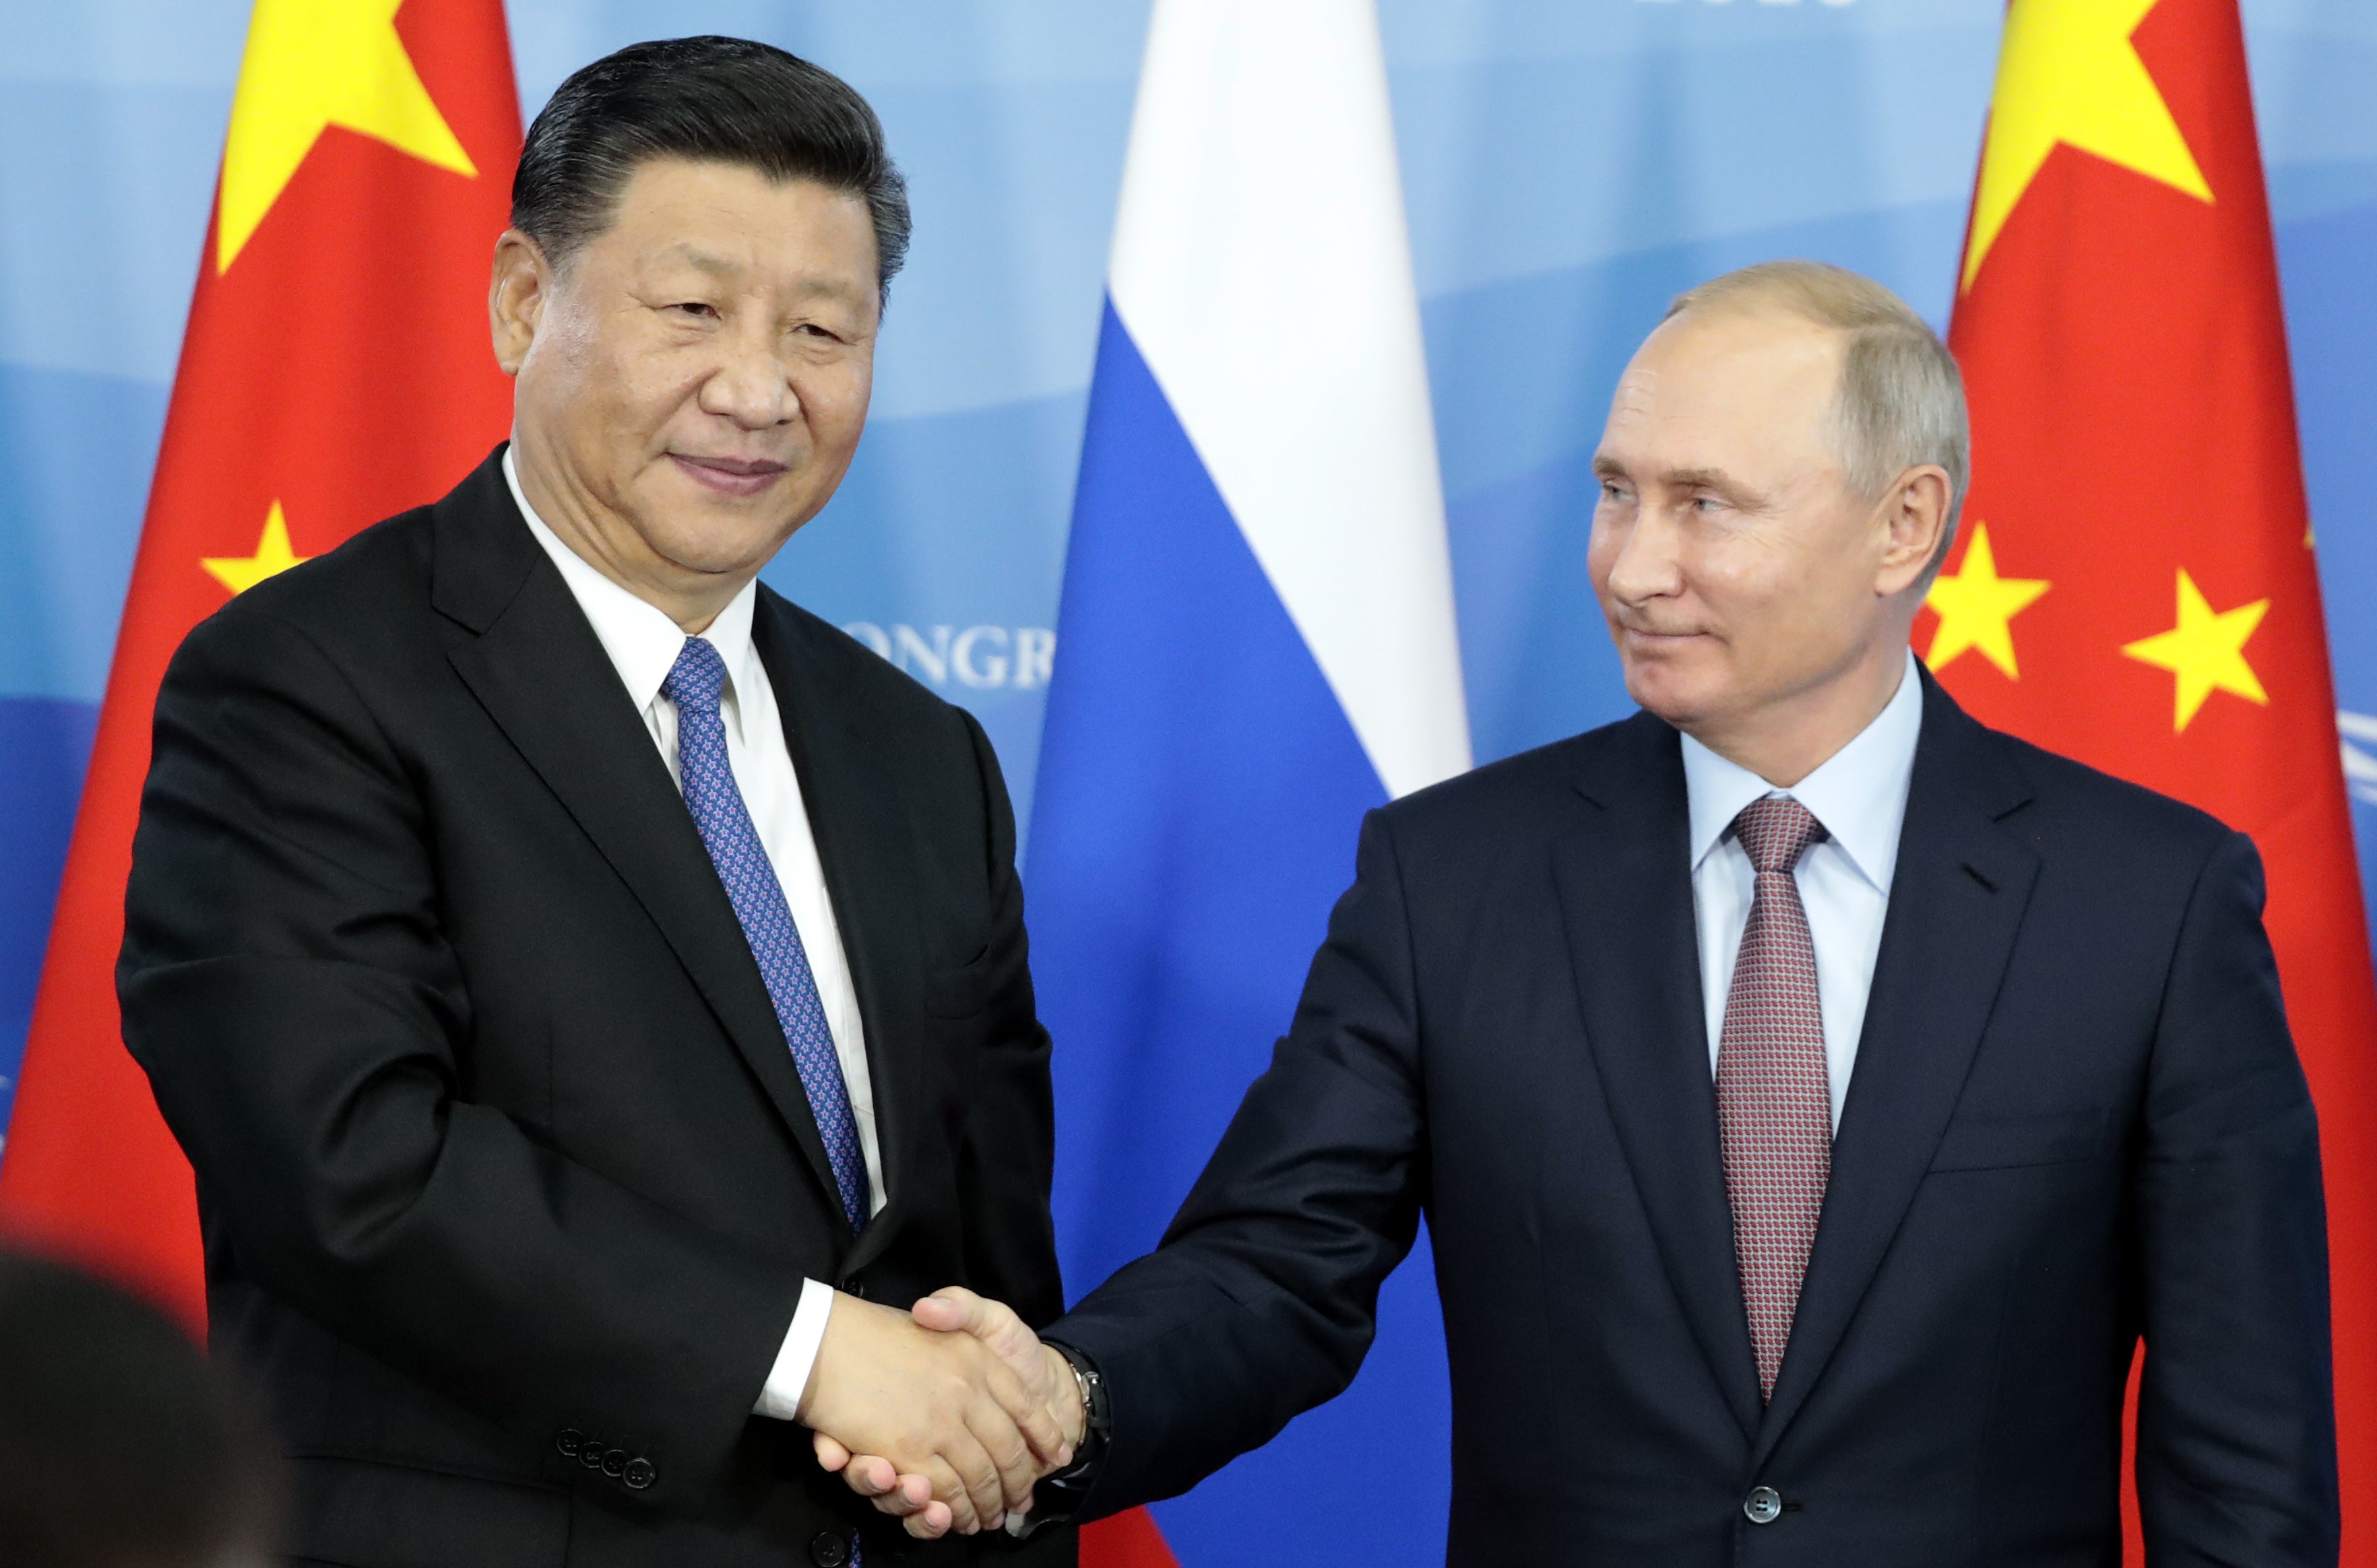 File: Russia’s President Vladimir Putin (R) shakes hands with his China’s counterpart Xi Jinping